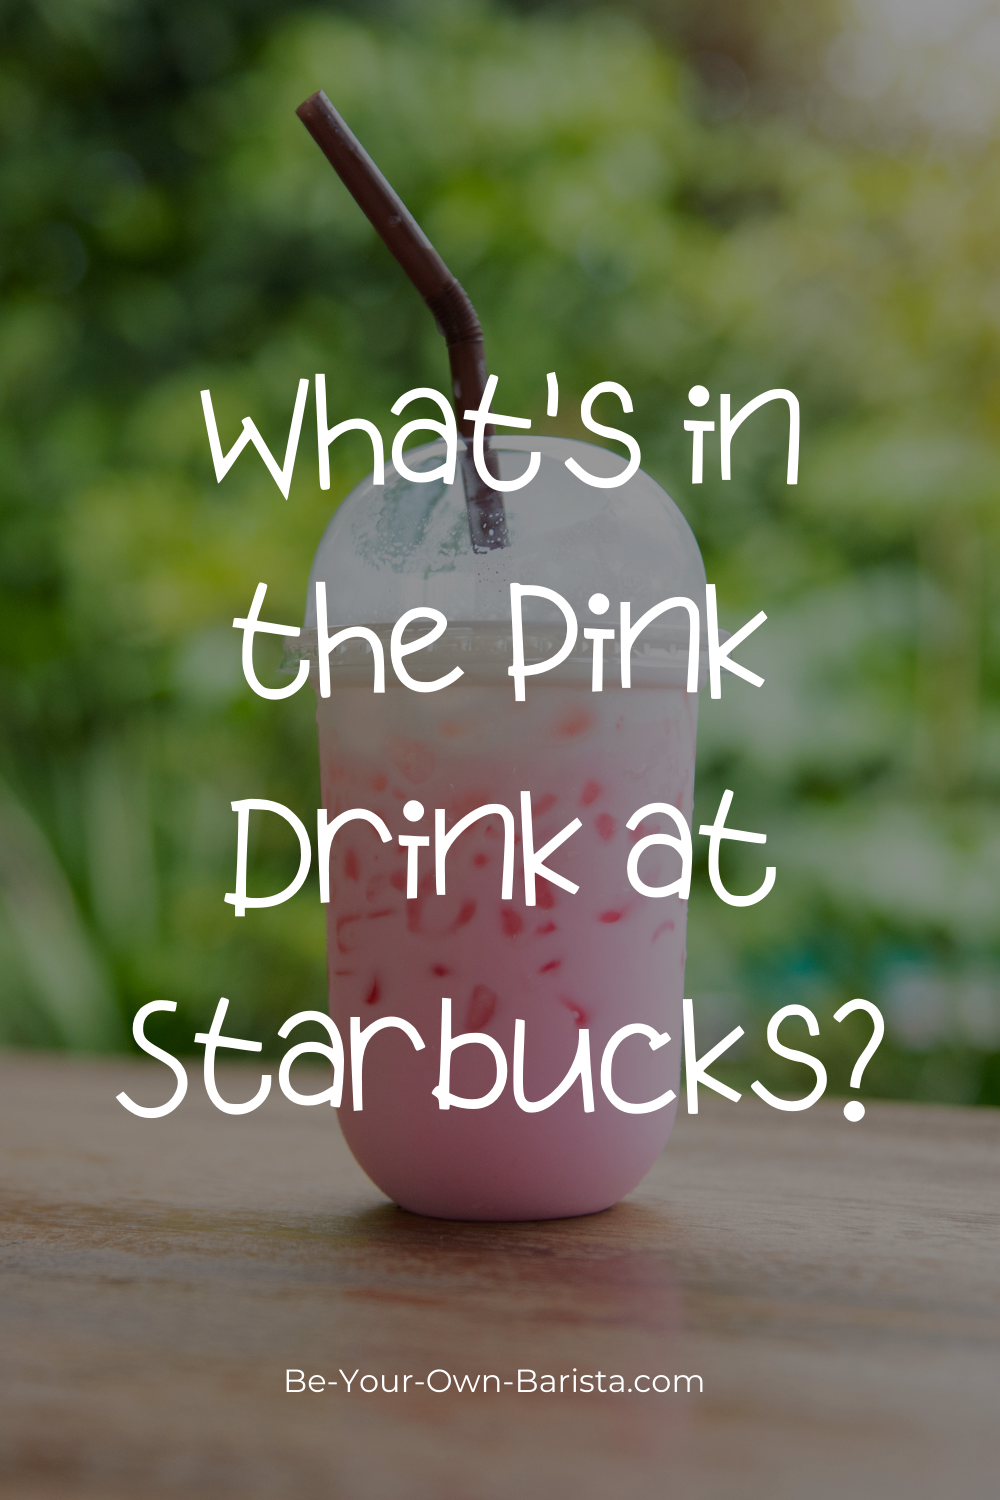 What's in the Pink Drink at Starbucks? What does it taste like? We'll tell you all that and more, including how to make your own Pink Drink at home!